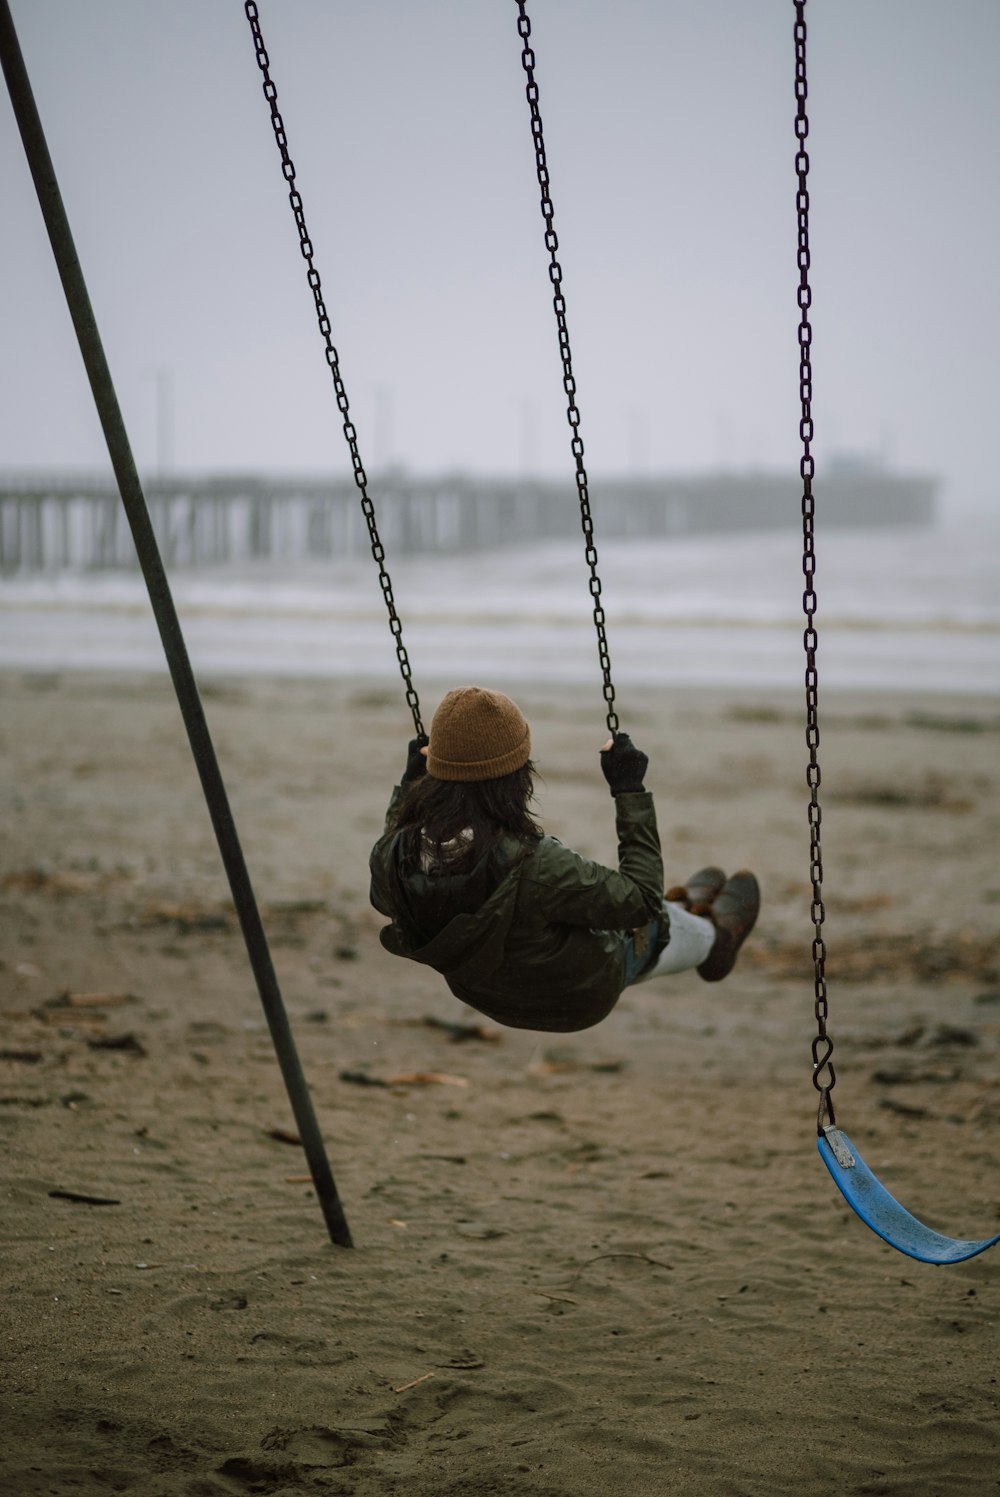 a person swinging on a swing set on a beach